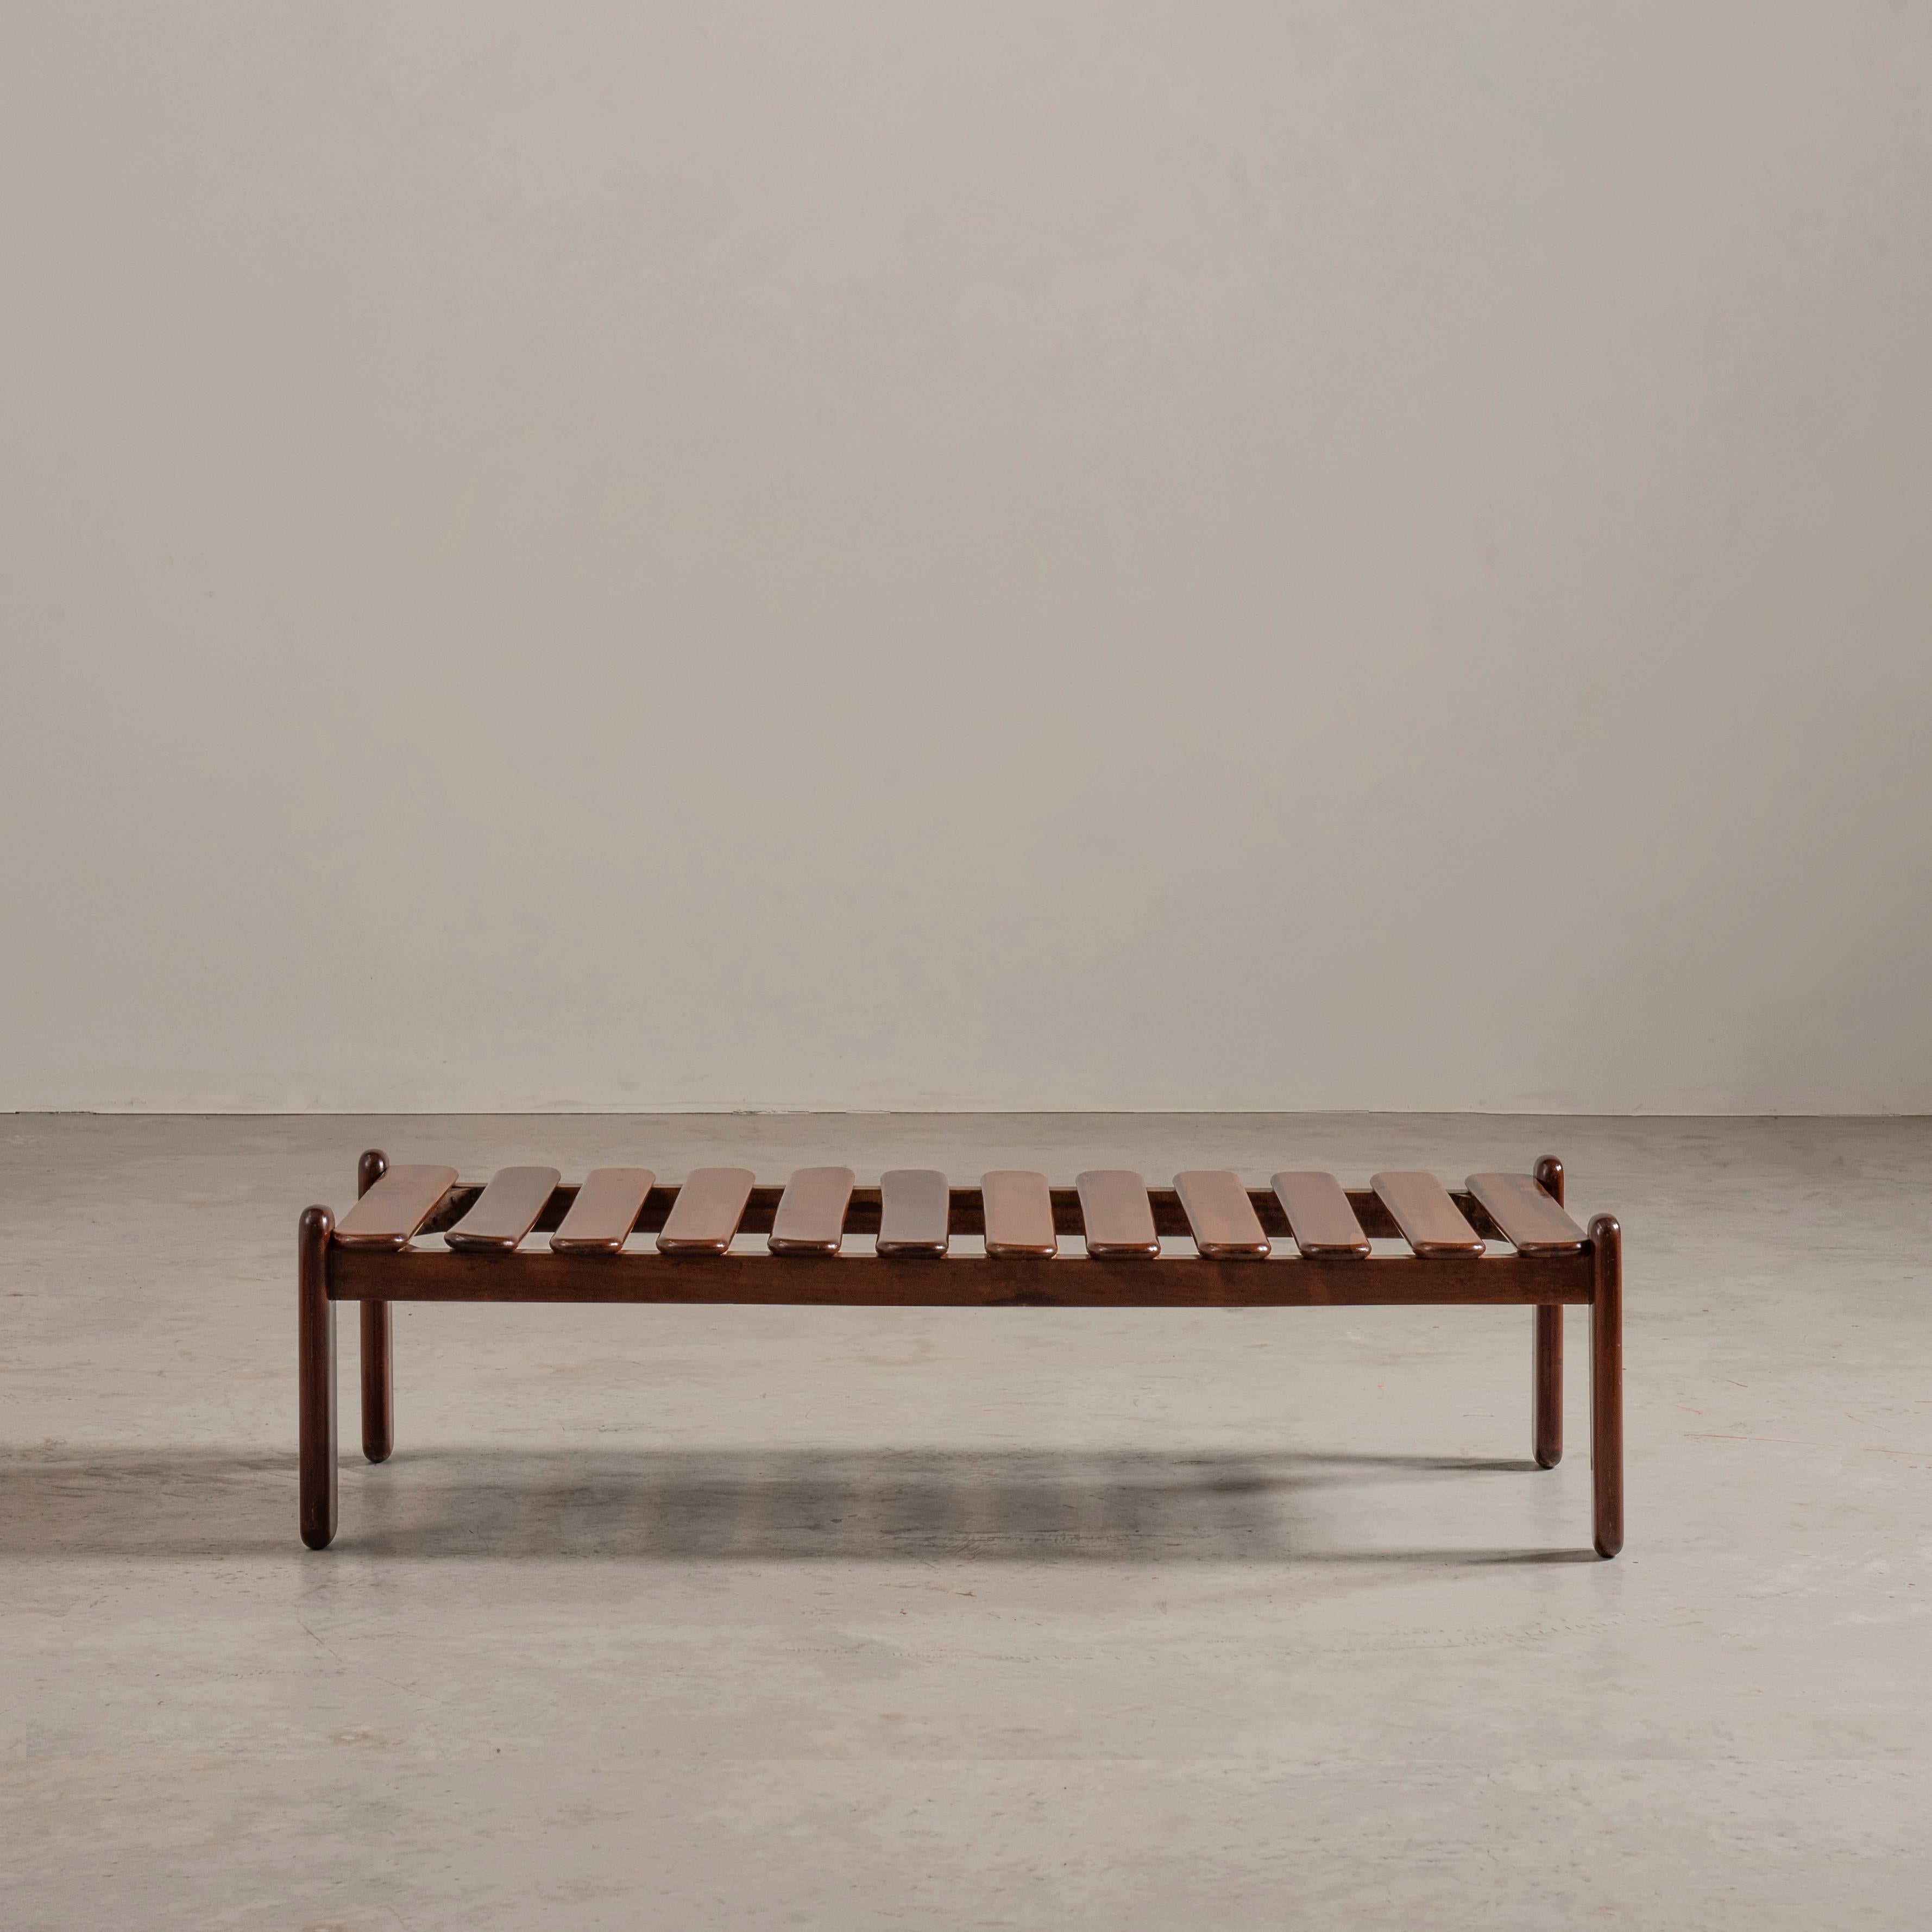 Add a touch of originality to your interior with this exceptional slat bench, expertly crafted from solid Brazilian hardwood. With its rounded slats, including the legs, this piece stands out as a truly distinctive creation. While it embodies the